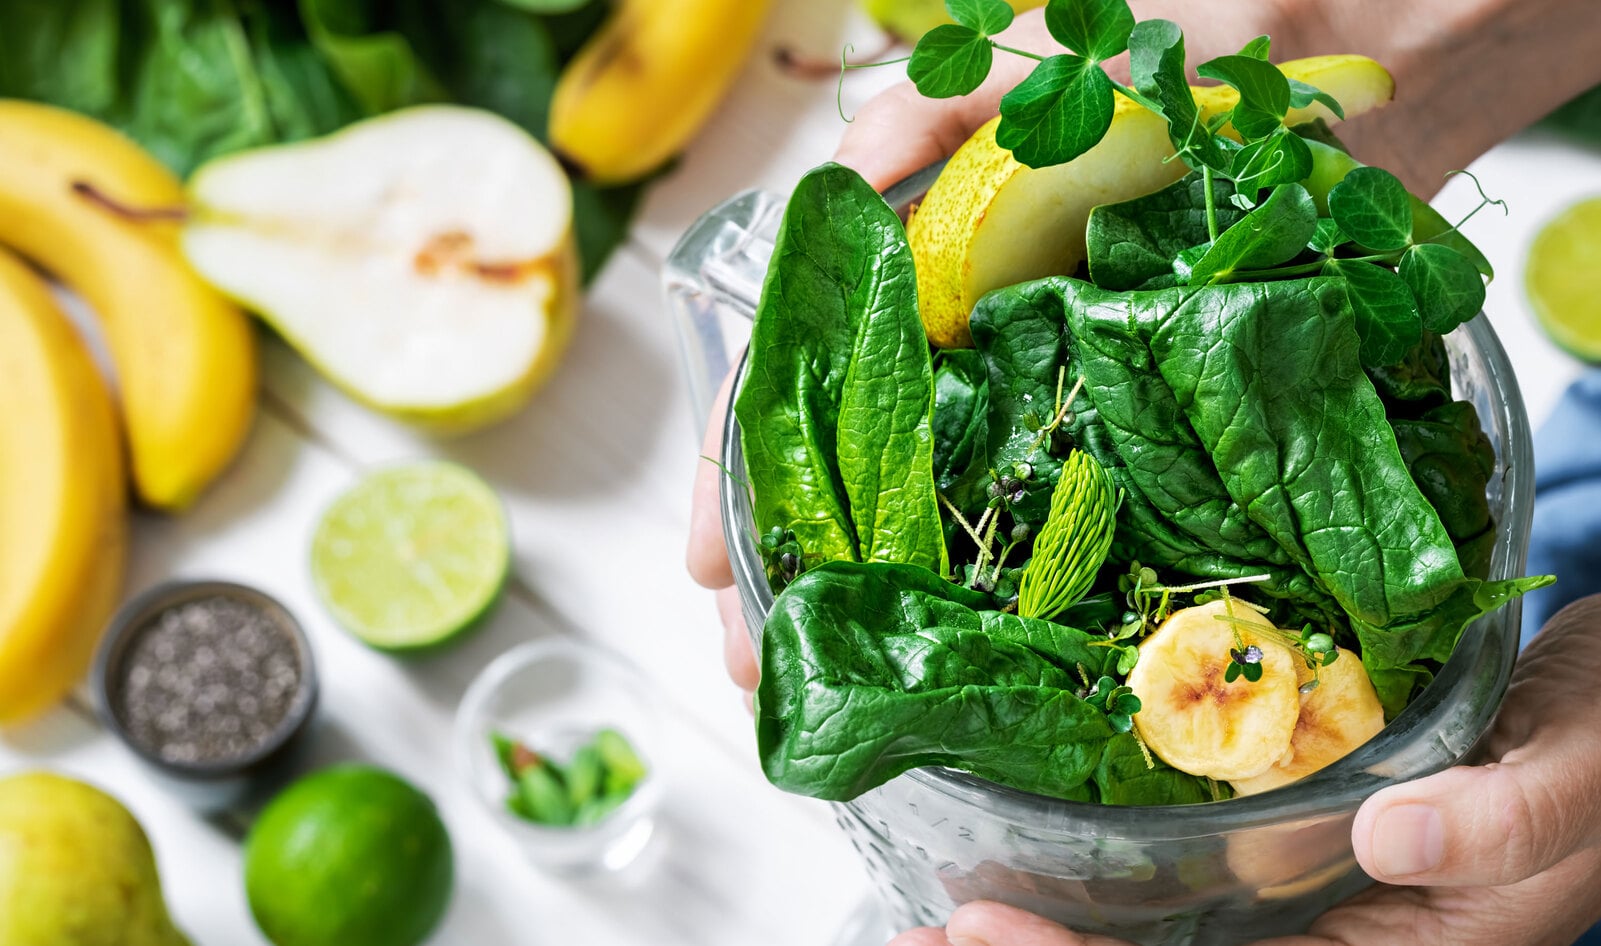 Bananas on Salad? This Is How Americans Like to Eat Their Greens